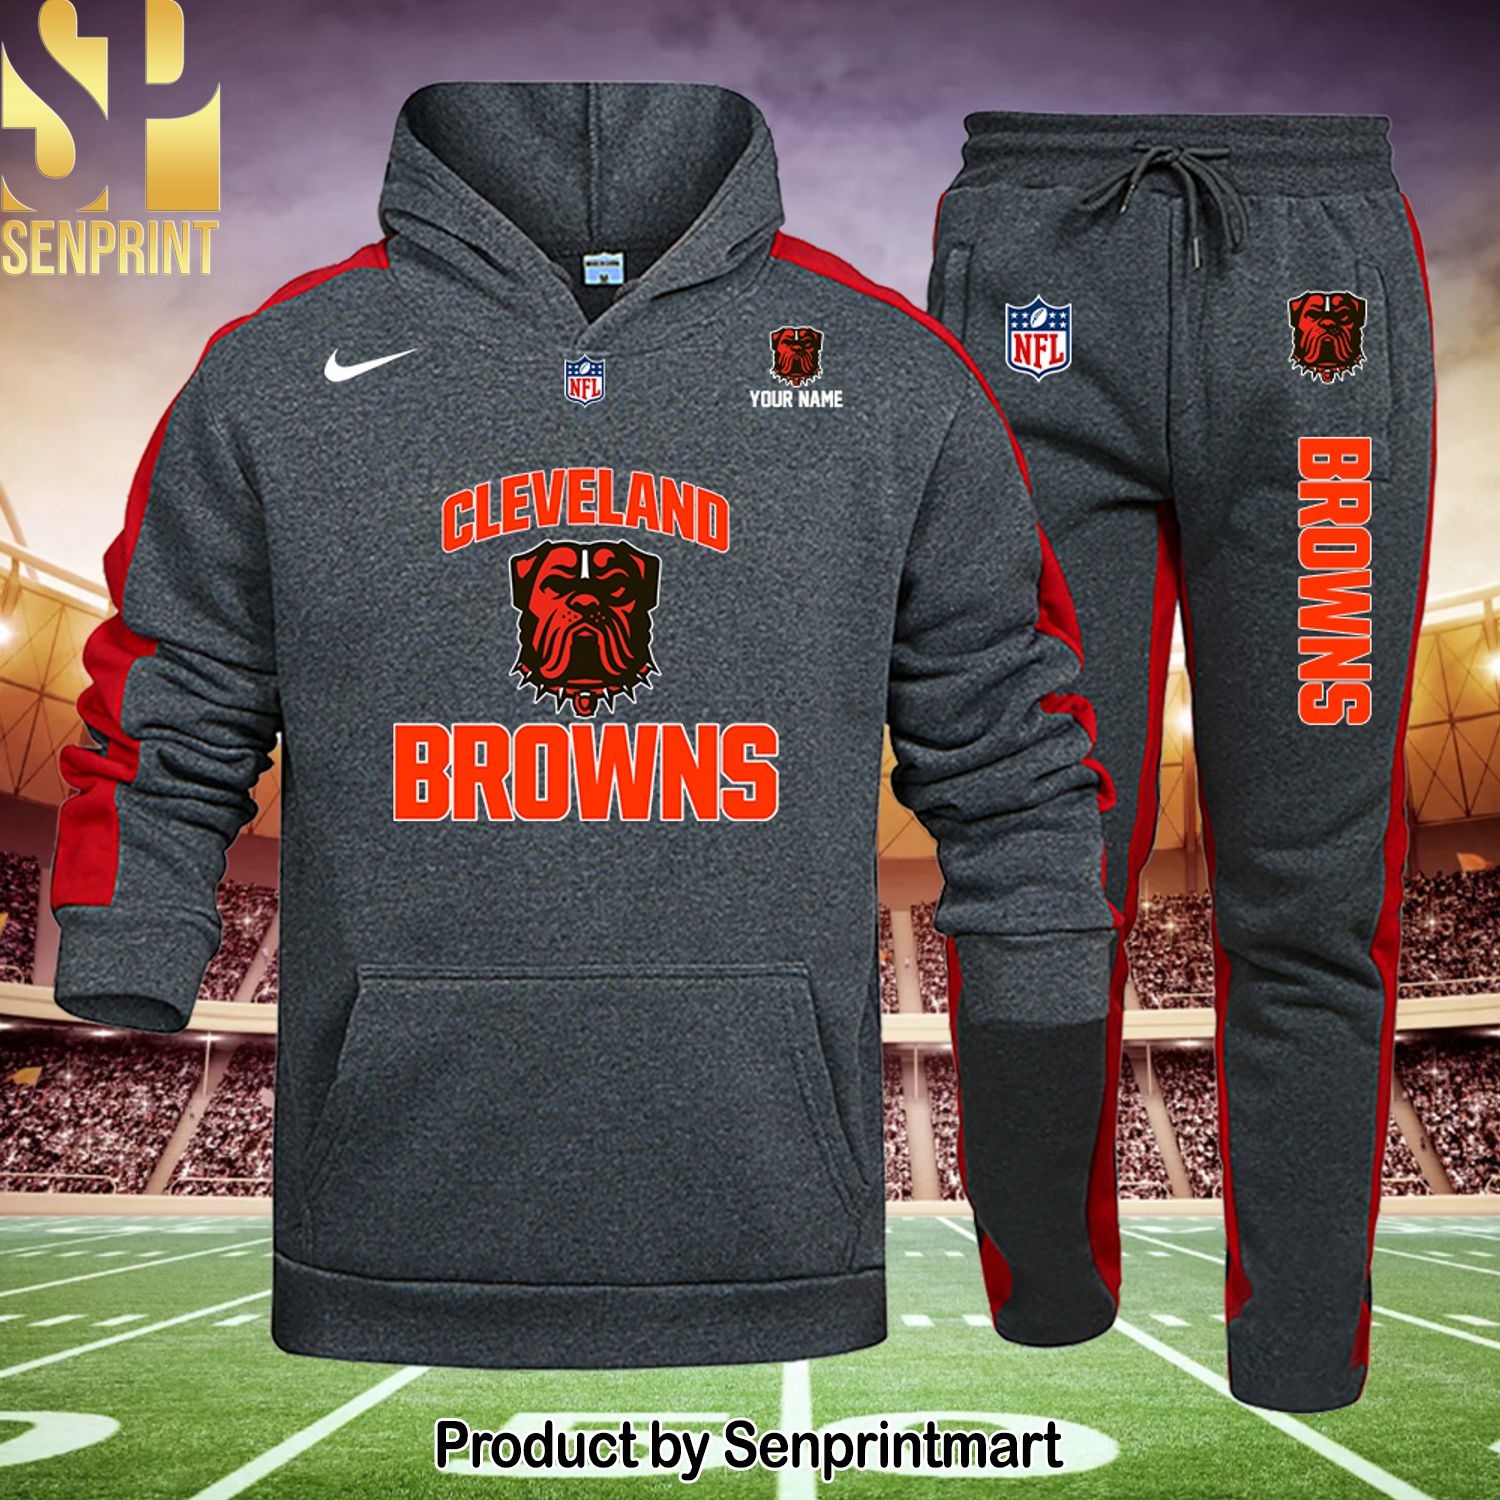 Cleveland Browns New Fashion Full Printed Shirt and Pants